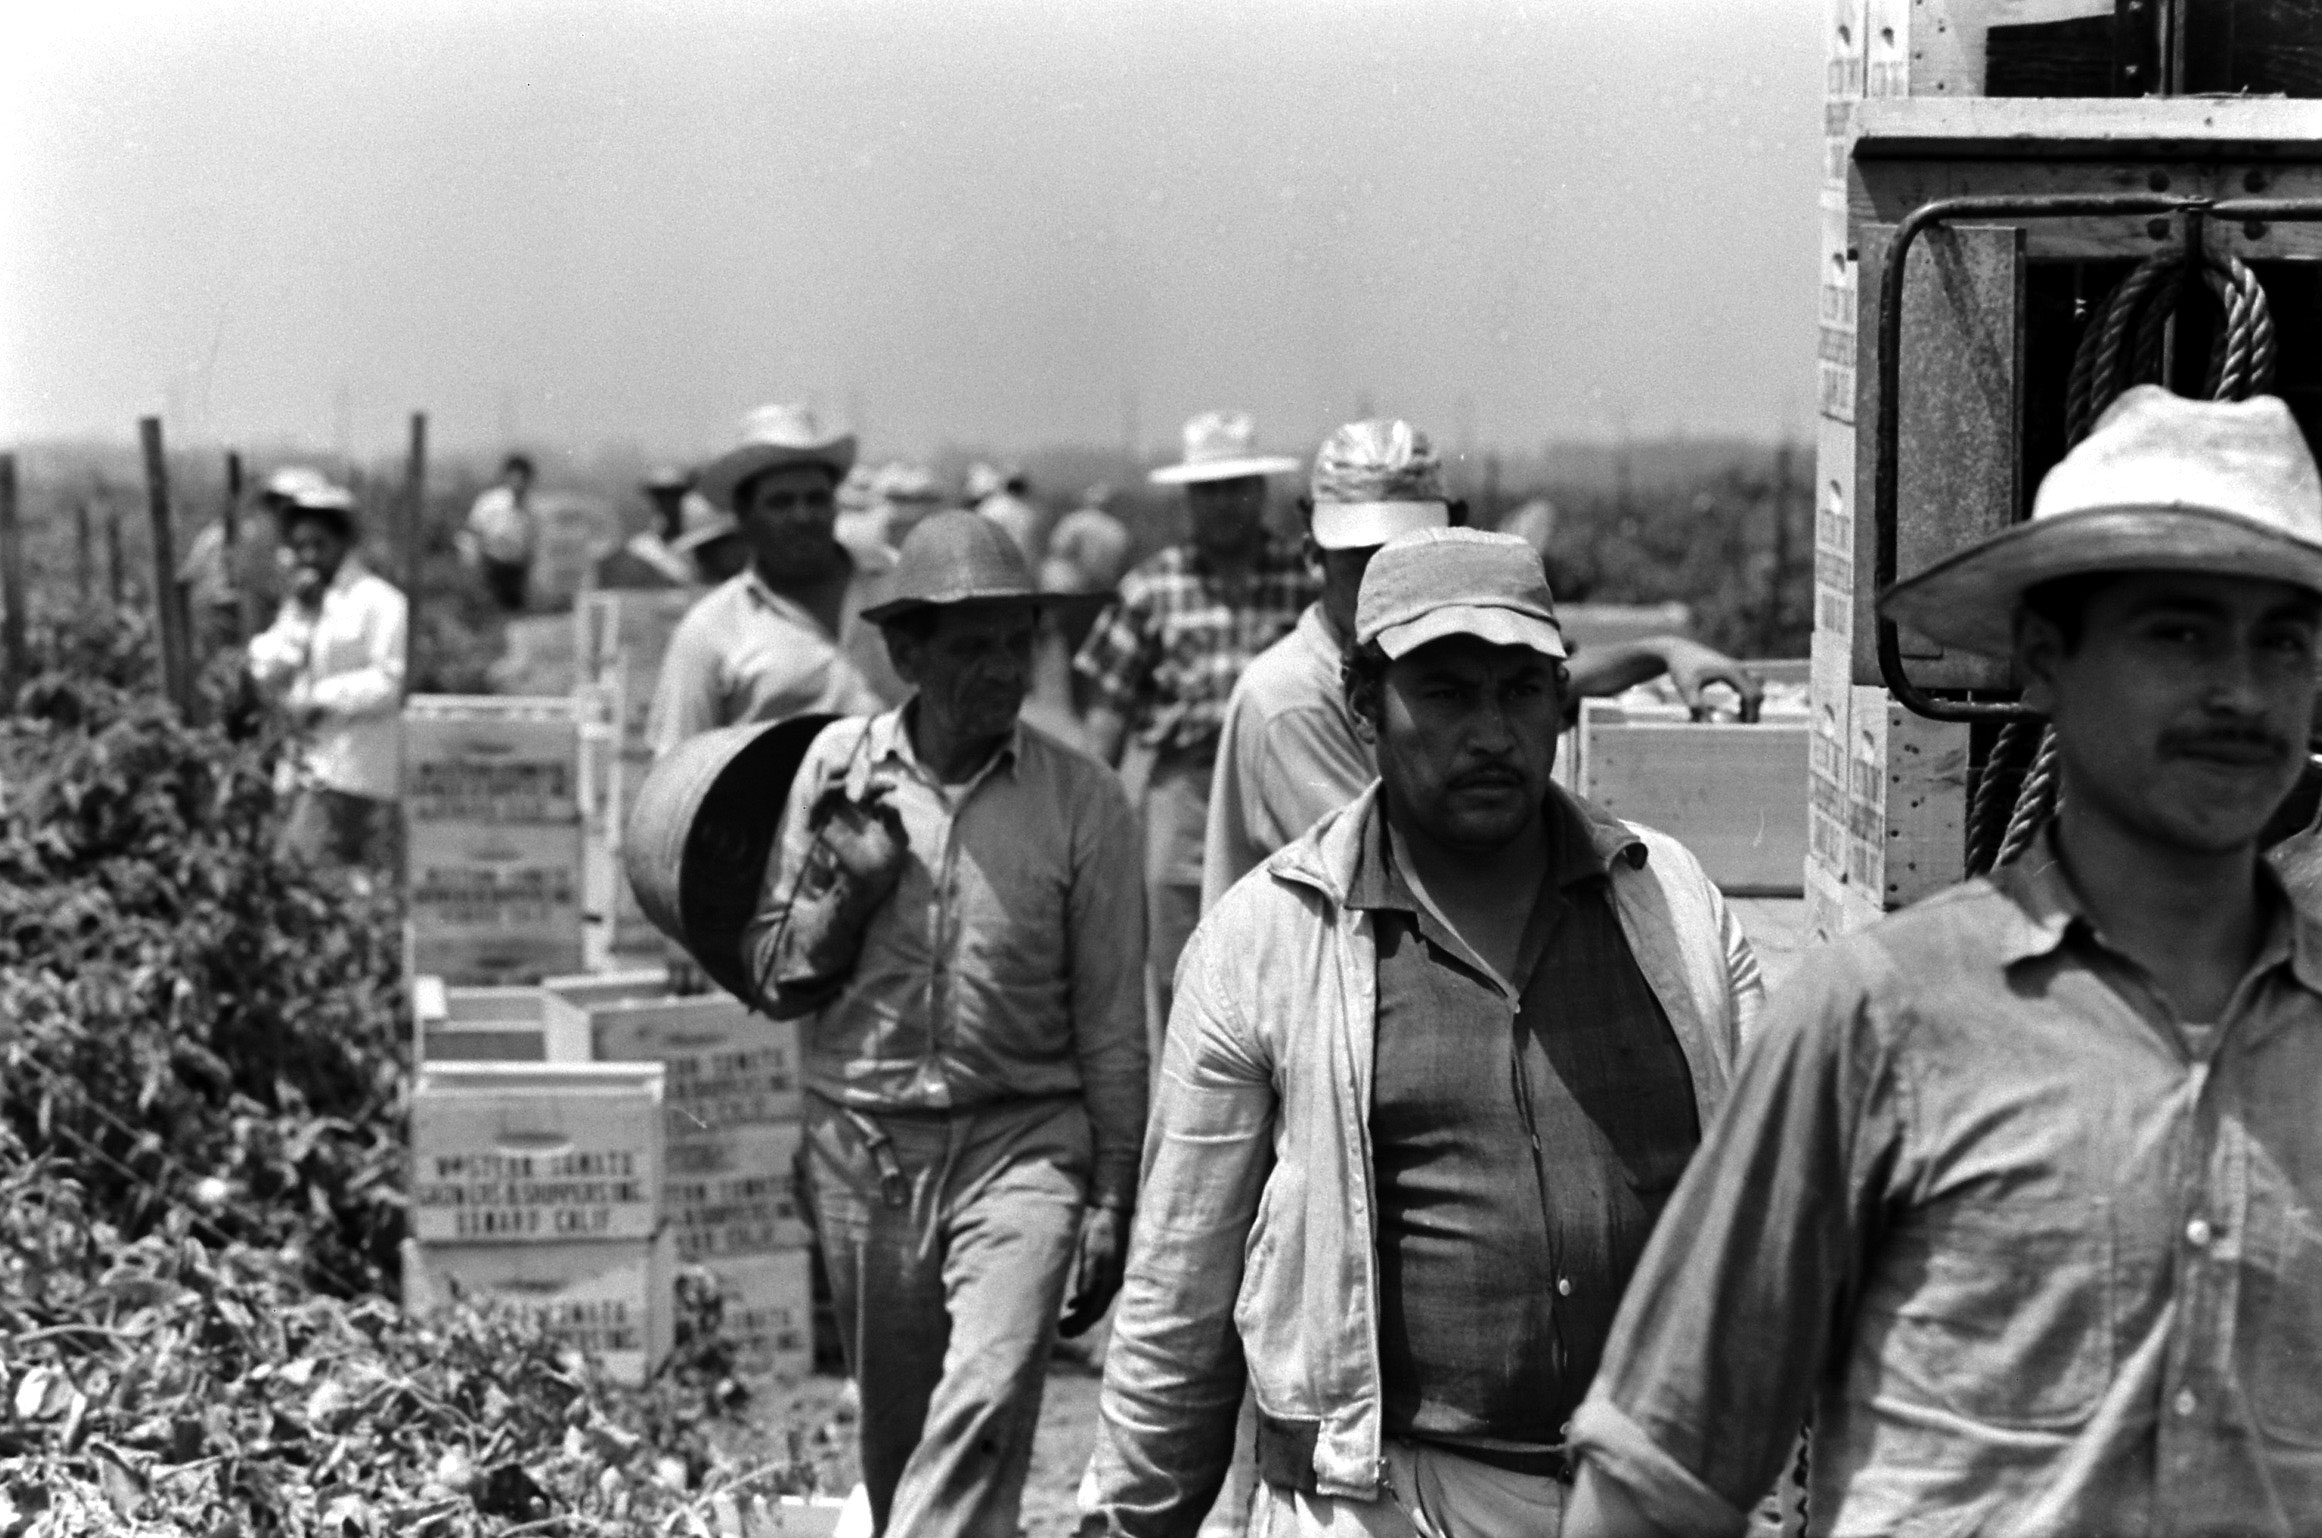 Migrant farm workers, USA, 1959.